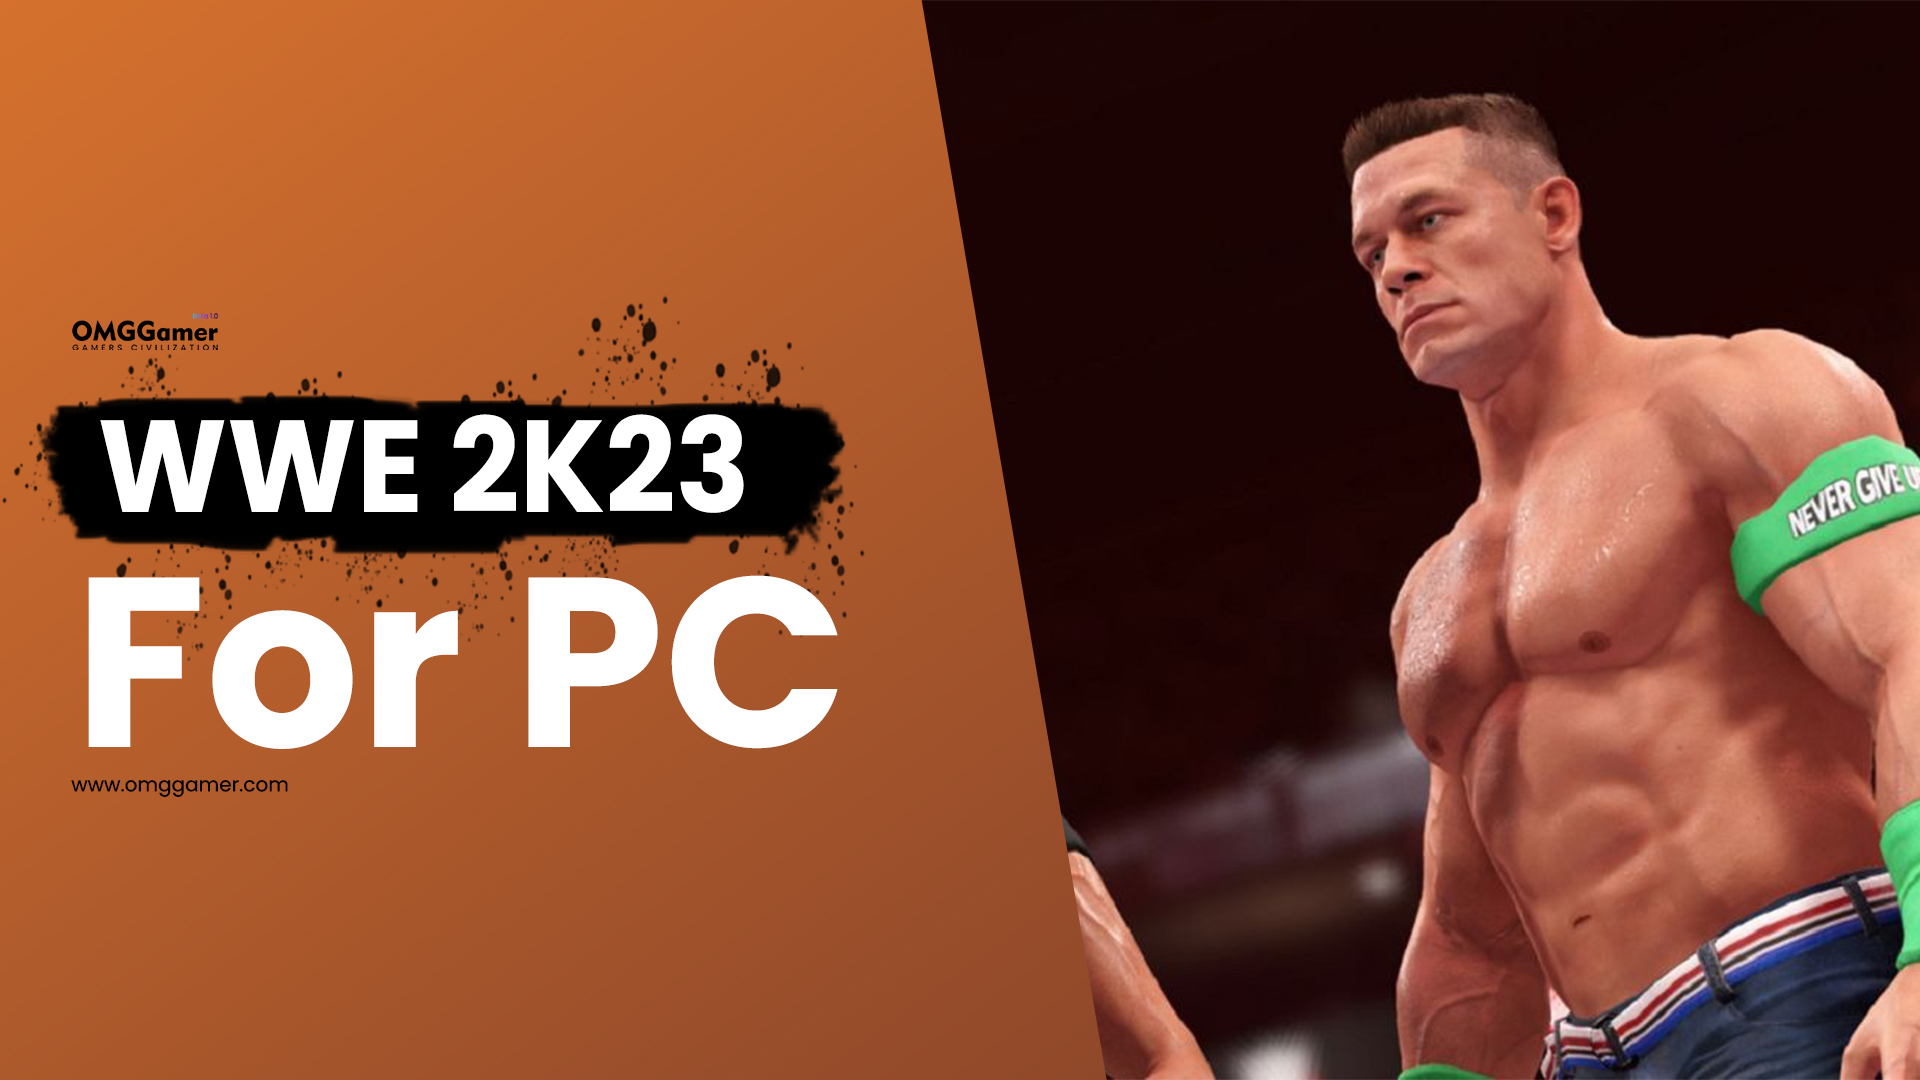 WWE 2K23 for PC